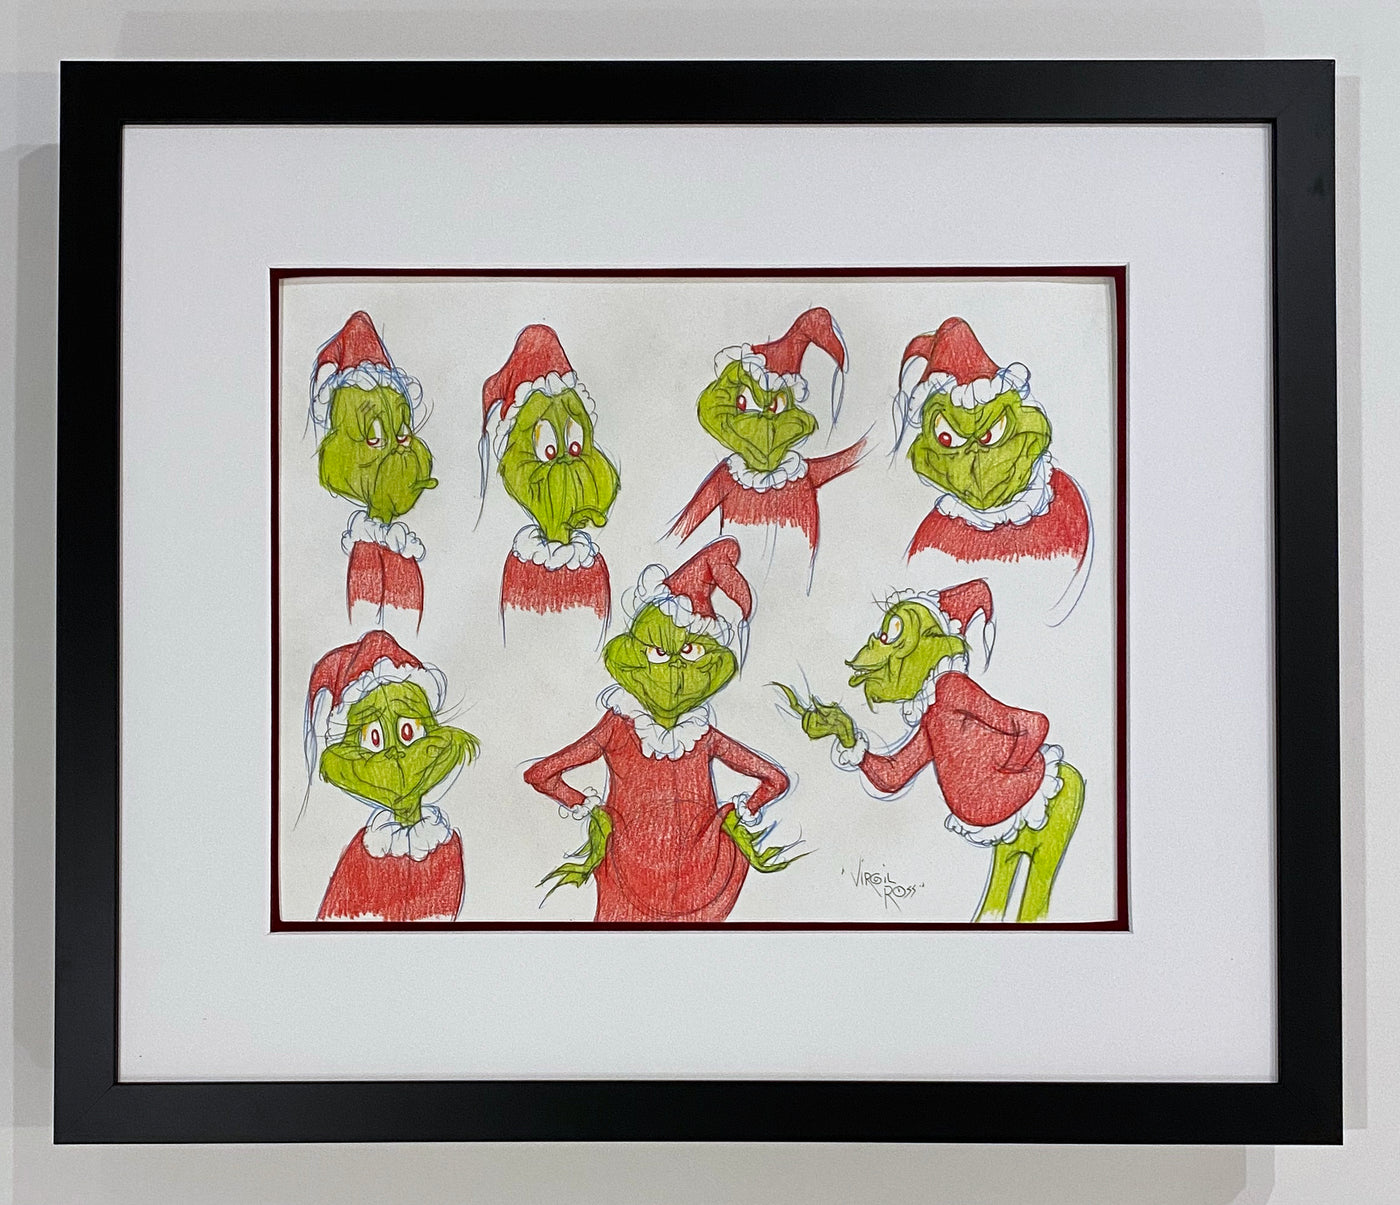 Original Warner Brothers Virgil Ross Model Sheet Animation Drawing featuring The Grinch